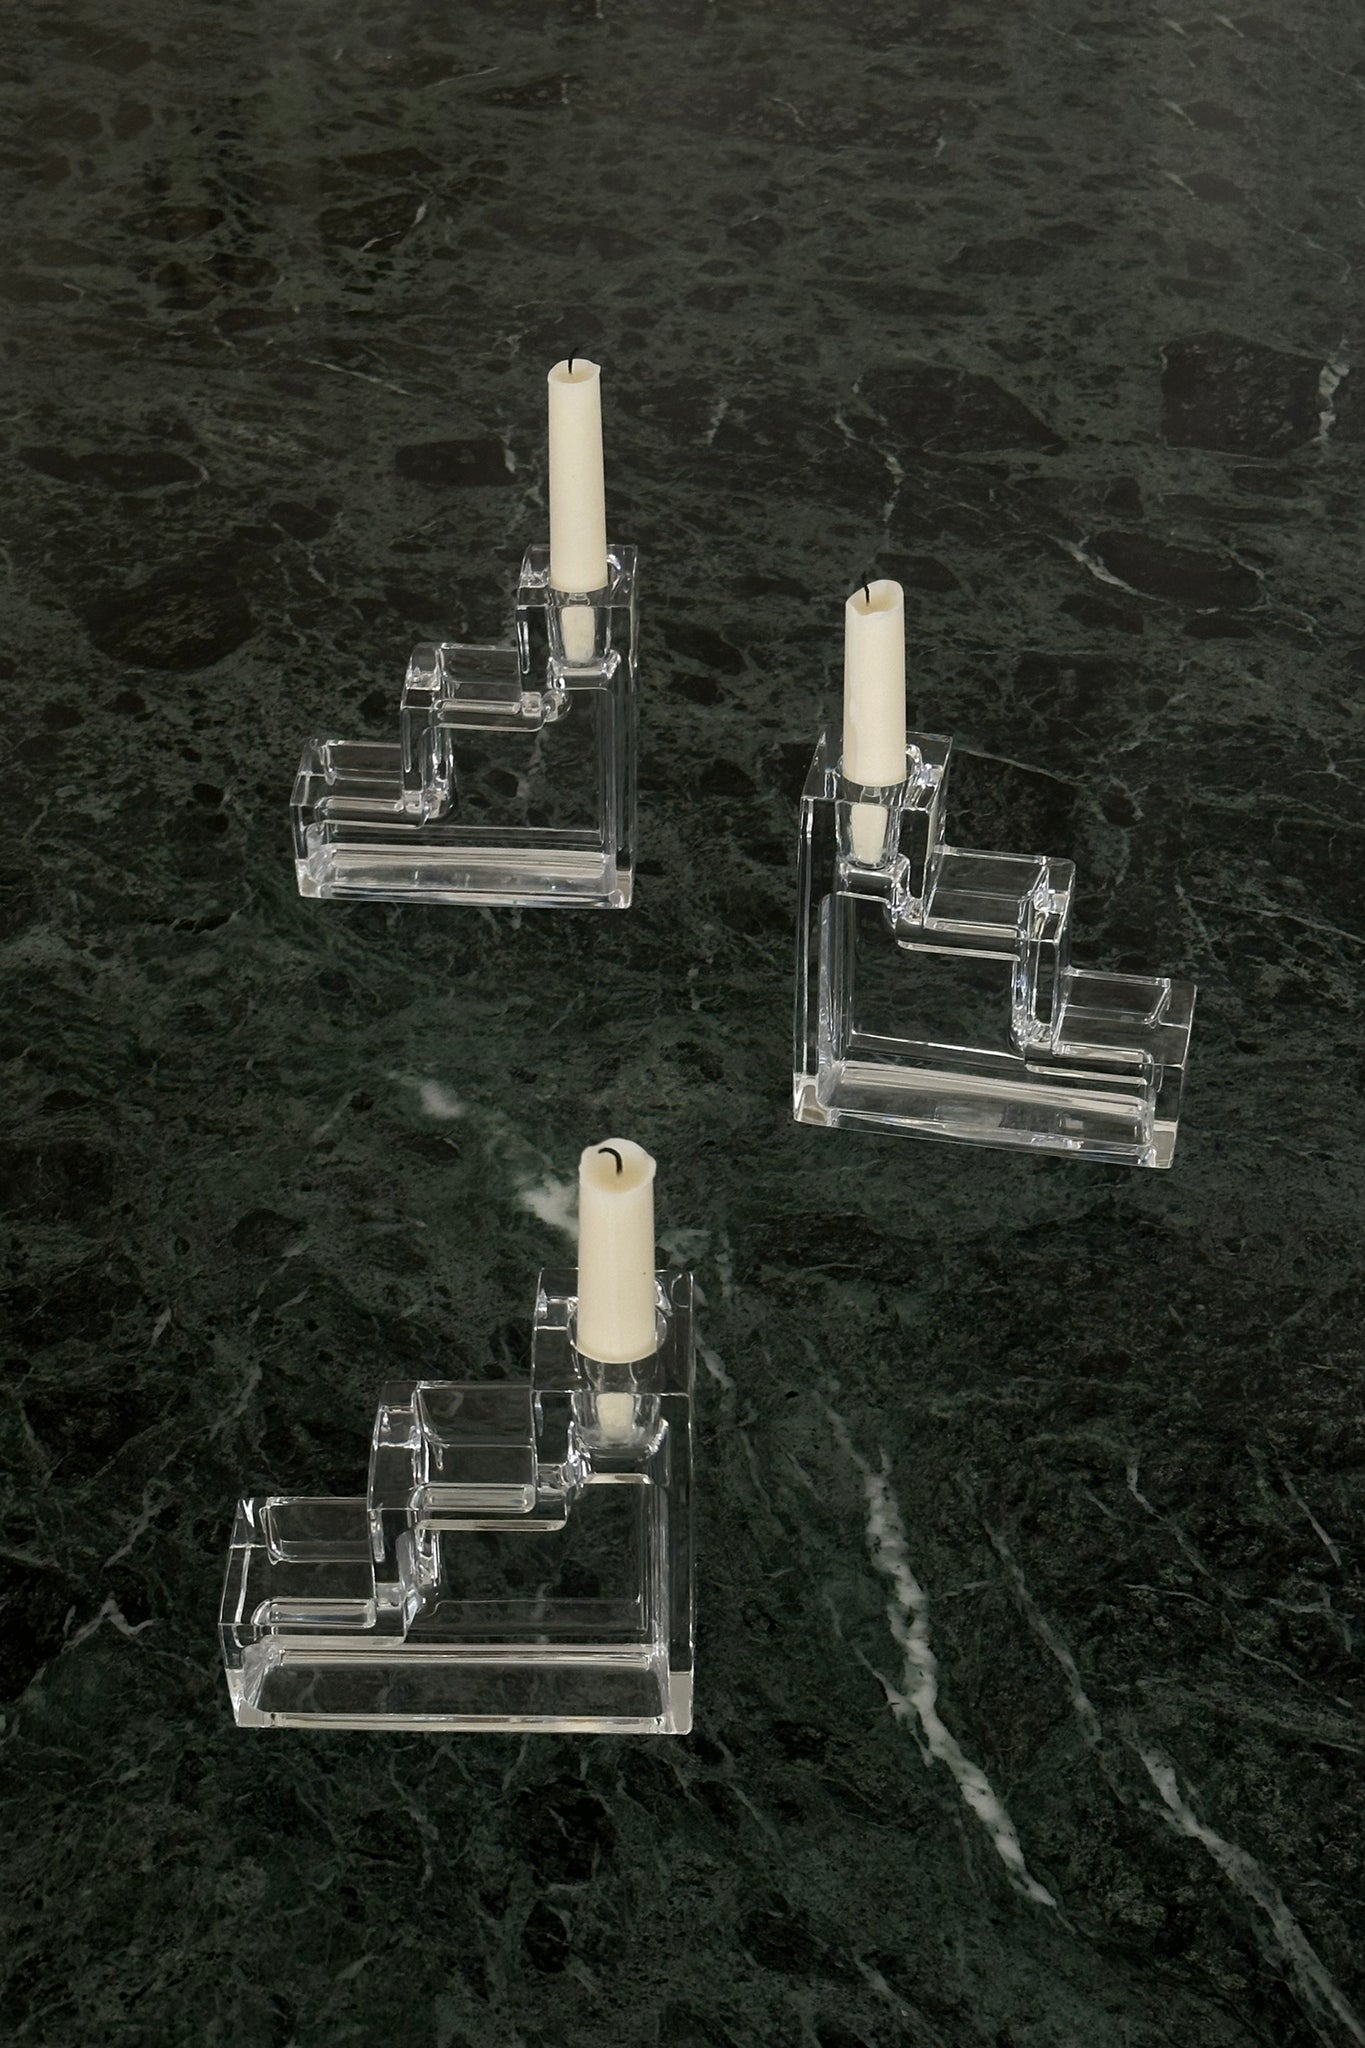 Pristine Table Architecture Candleholders